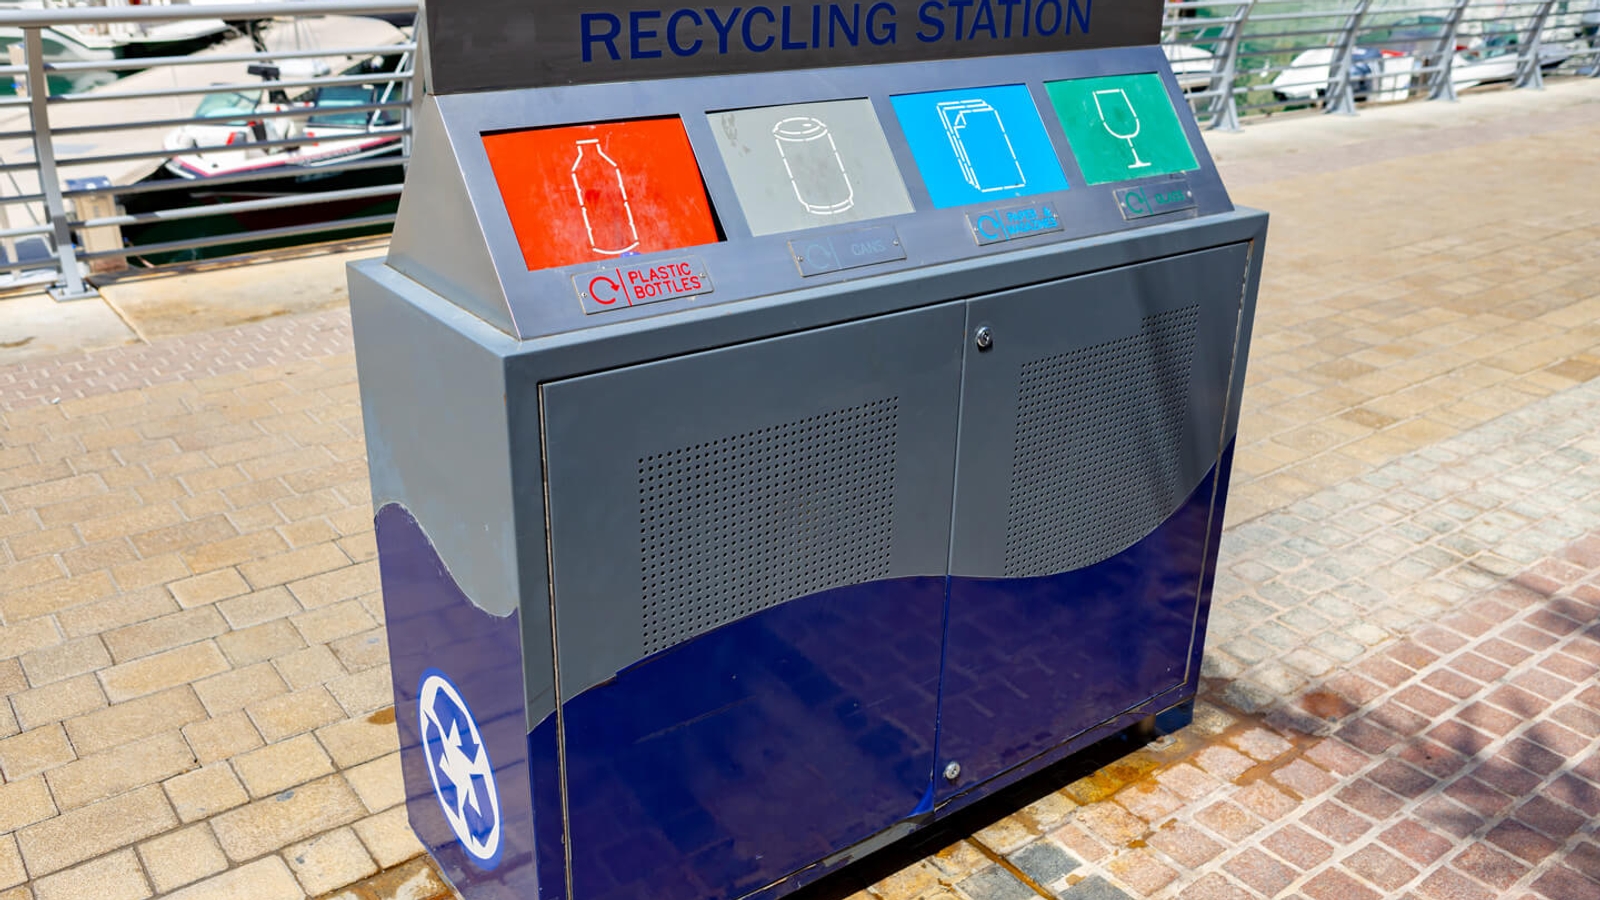 A 'recycling station' bin outside with different holes for types of recycling